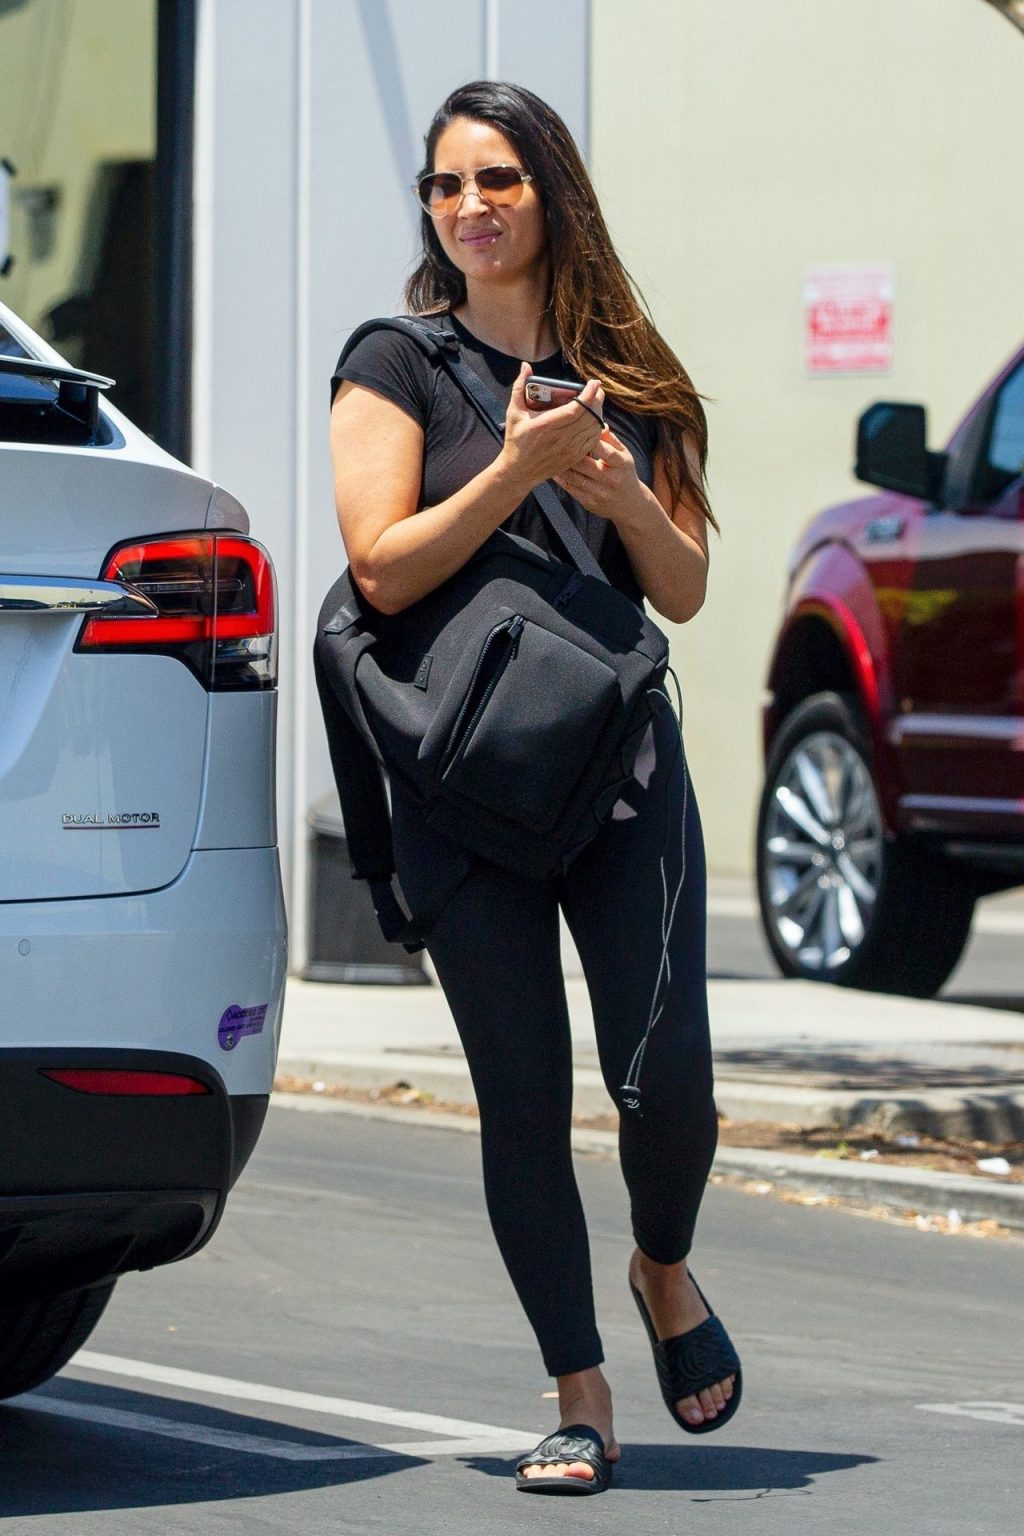 Olivia Munn Is Pictured Leaving a Private Gym Session in LA (16 Photos)